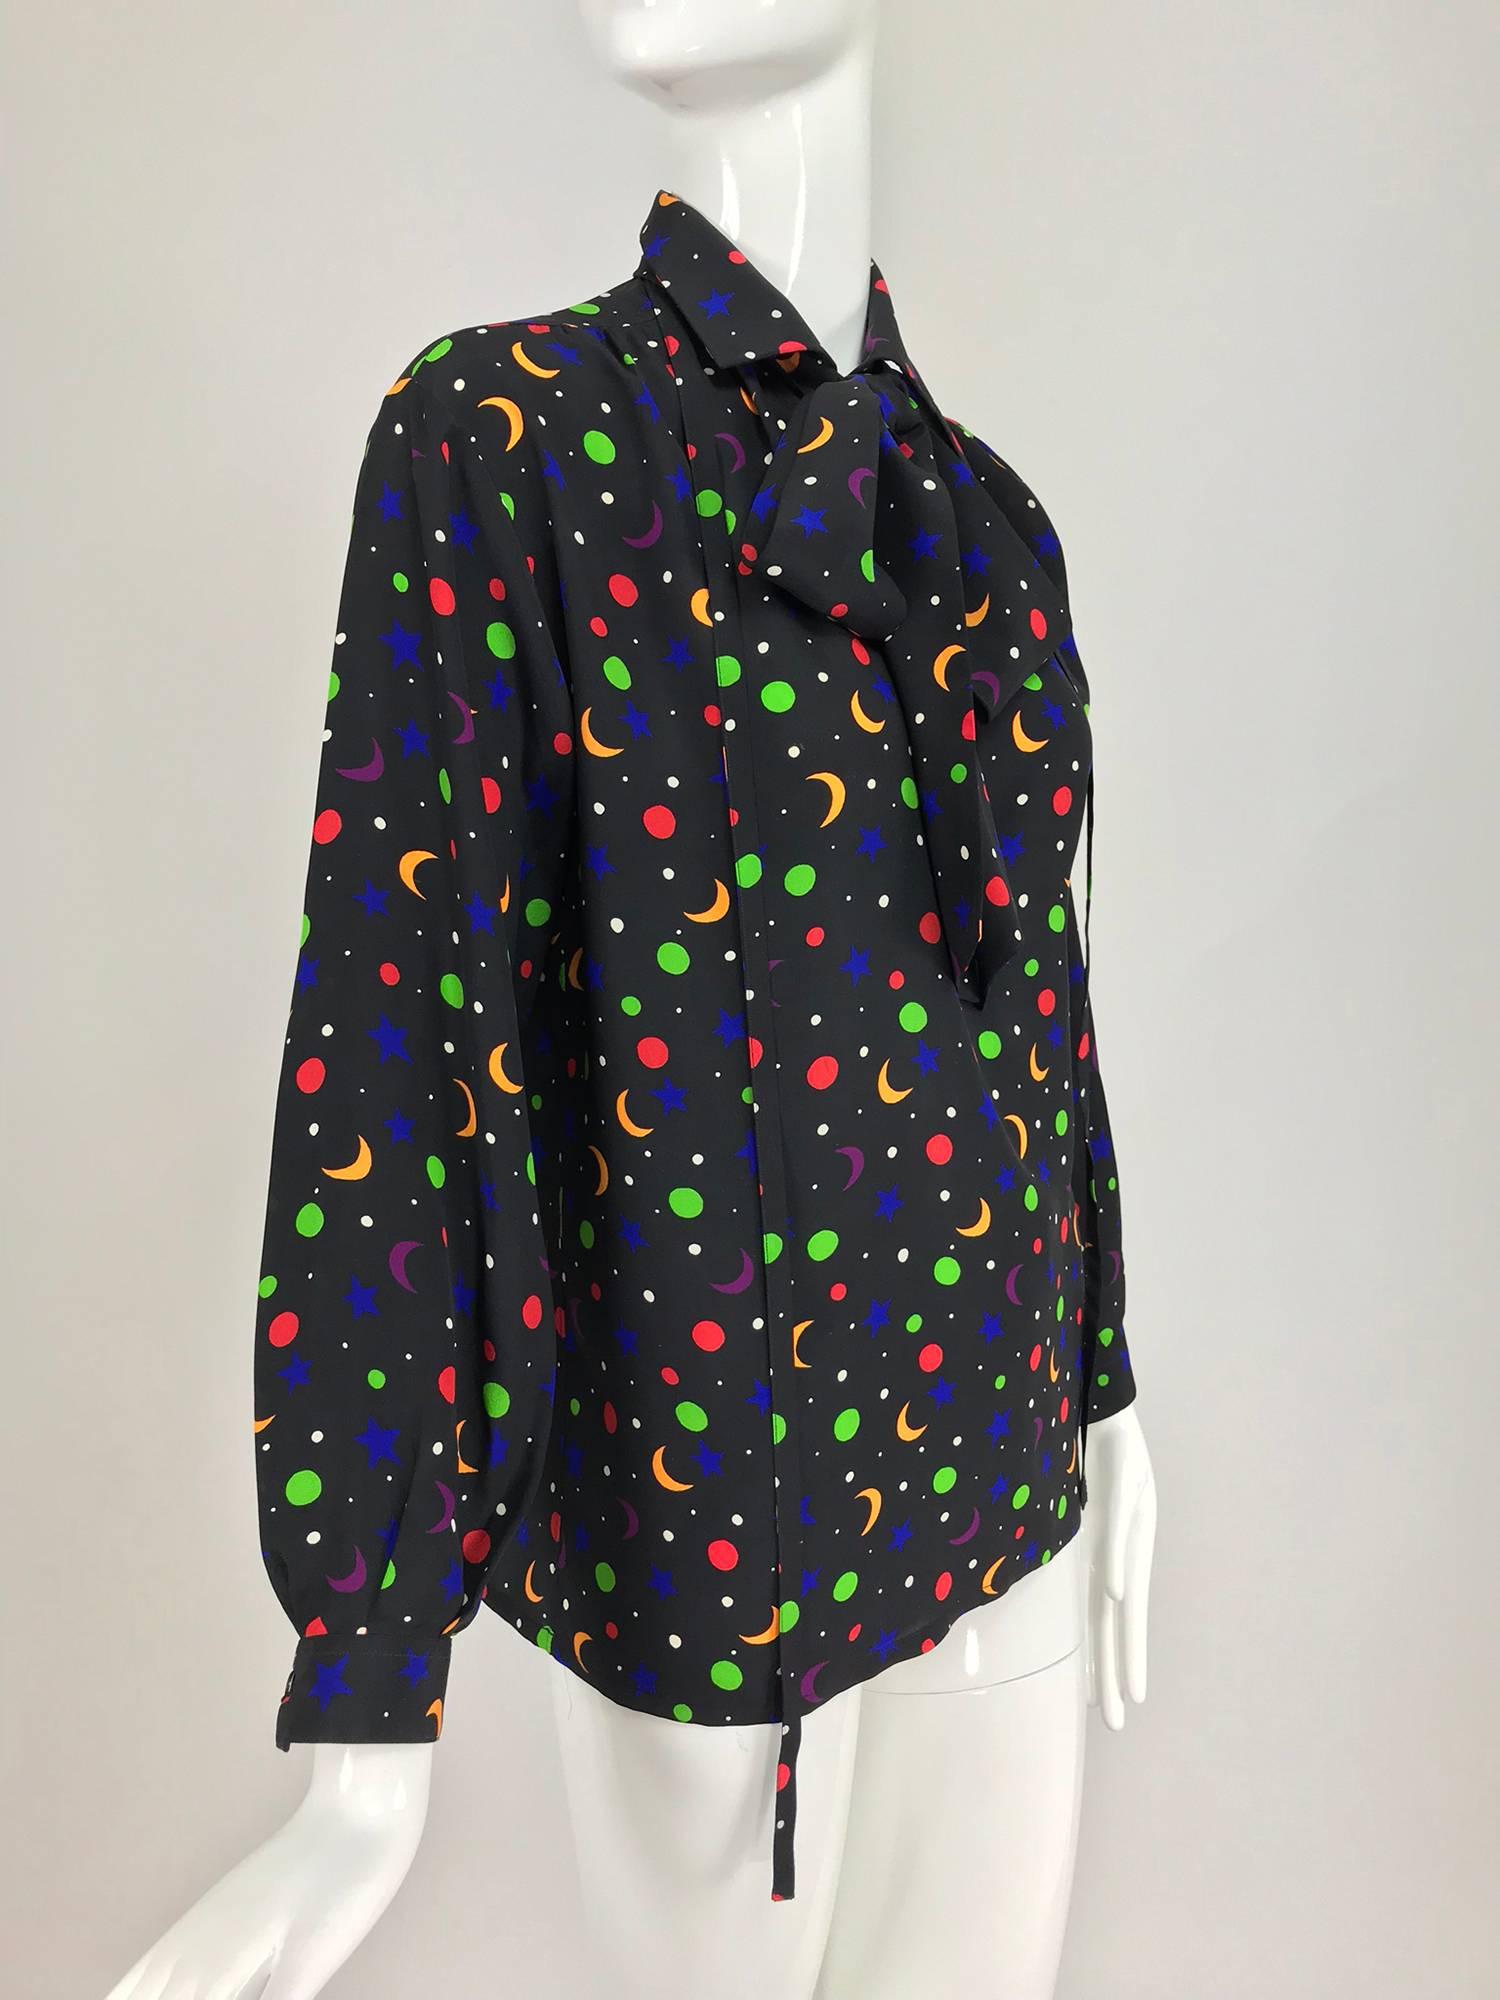 Yves Saint Laurent moon and stars silk blouse 1979 documented...Pussy bow blouse in an Iconic print from Yves Saint Laurent...Black silk is scattered with boldly coloured moons and stars...The blouse features Long sleeves with button cuffs, button